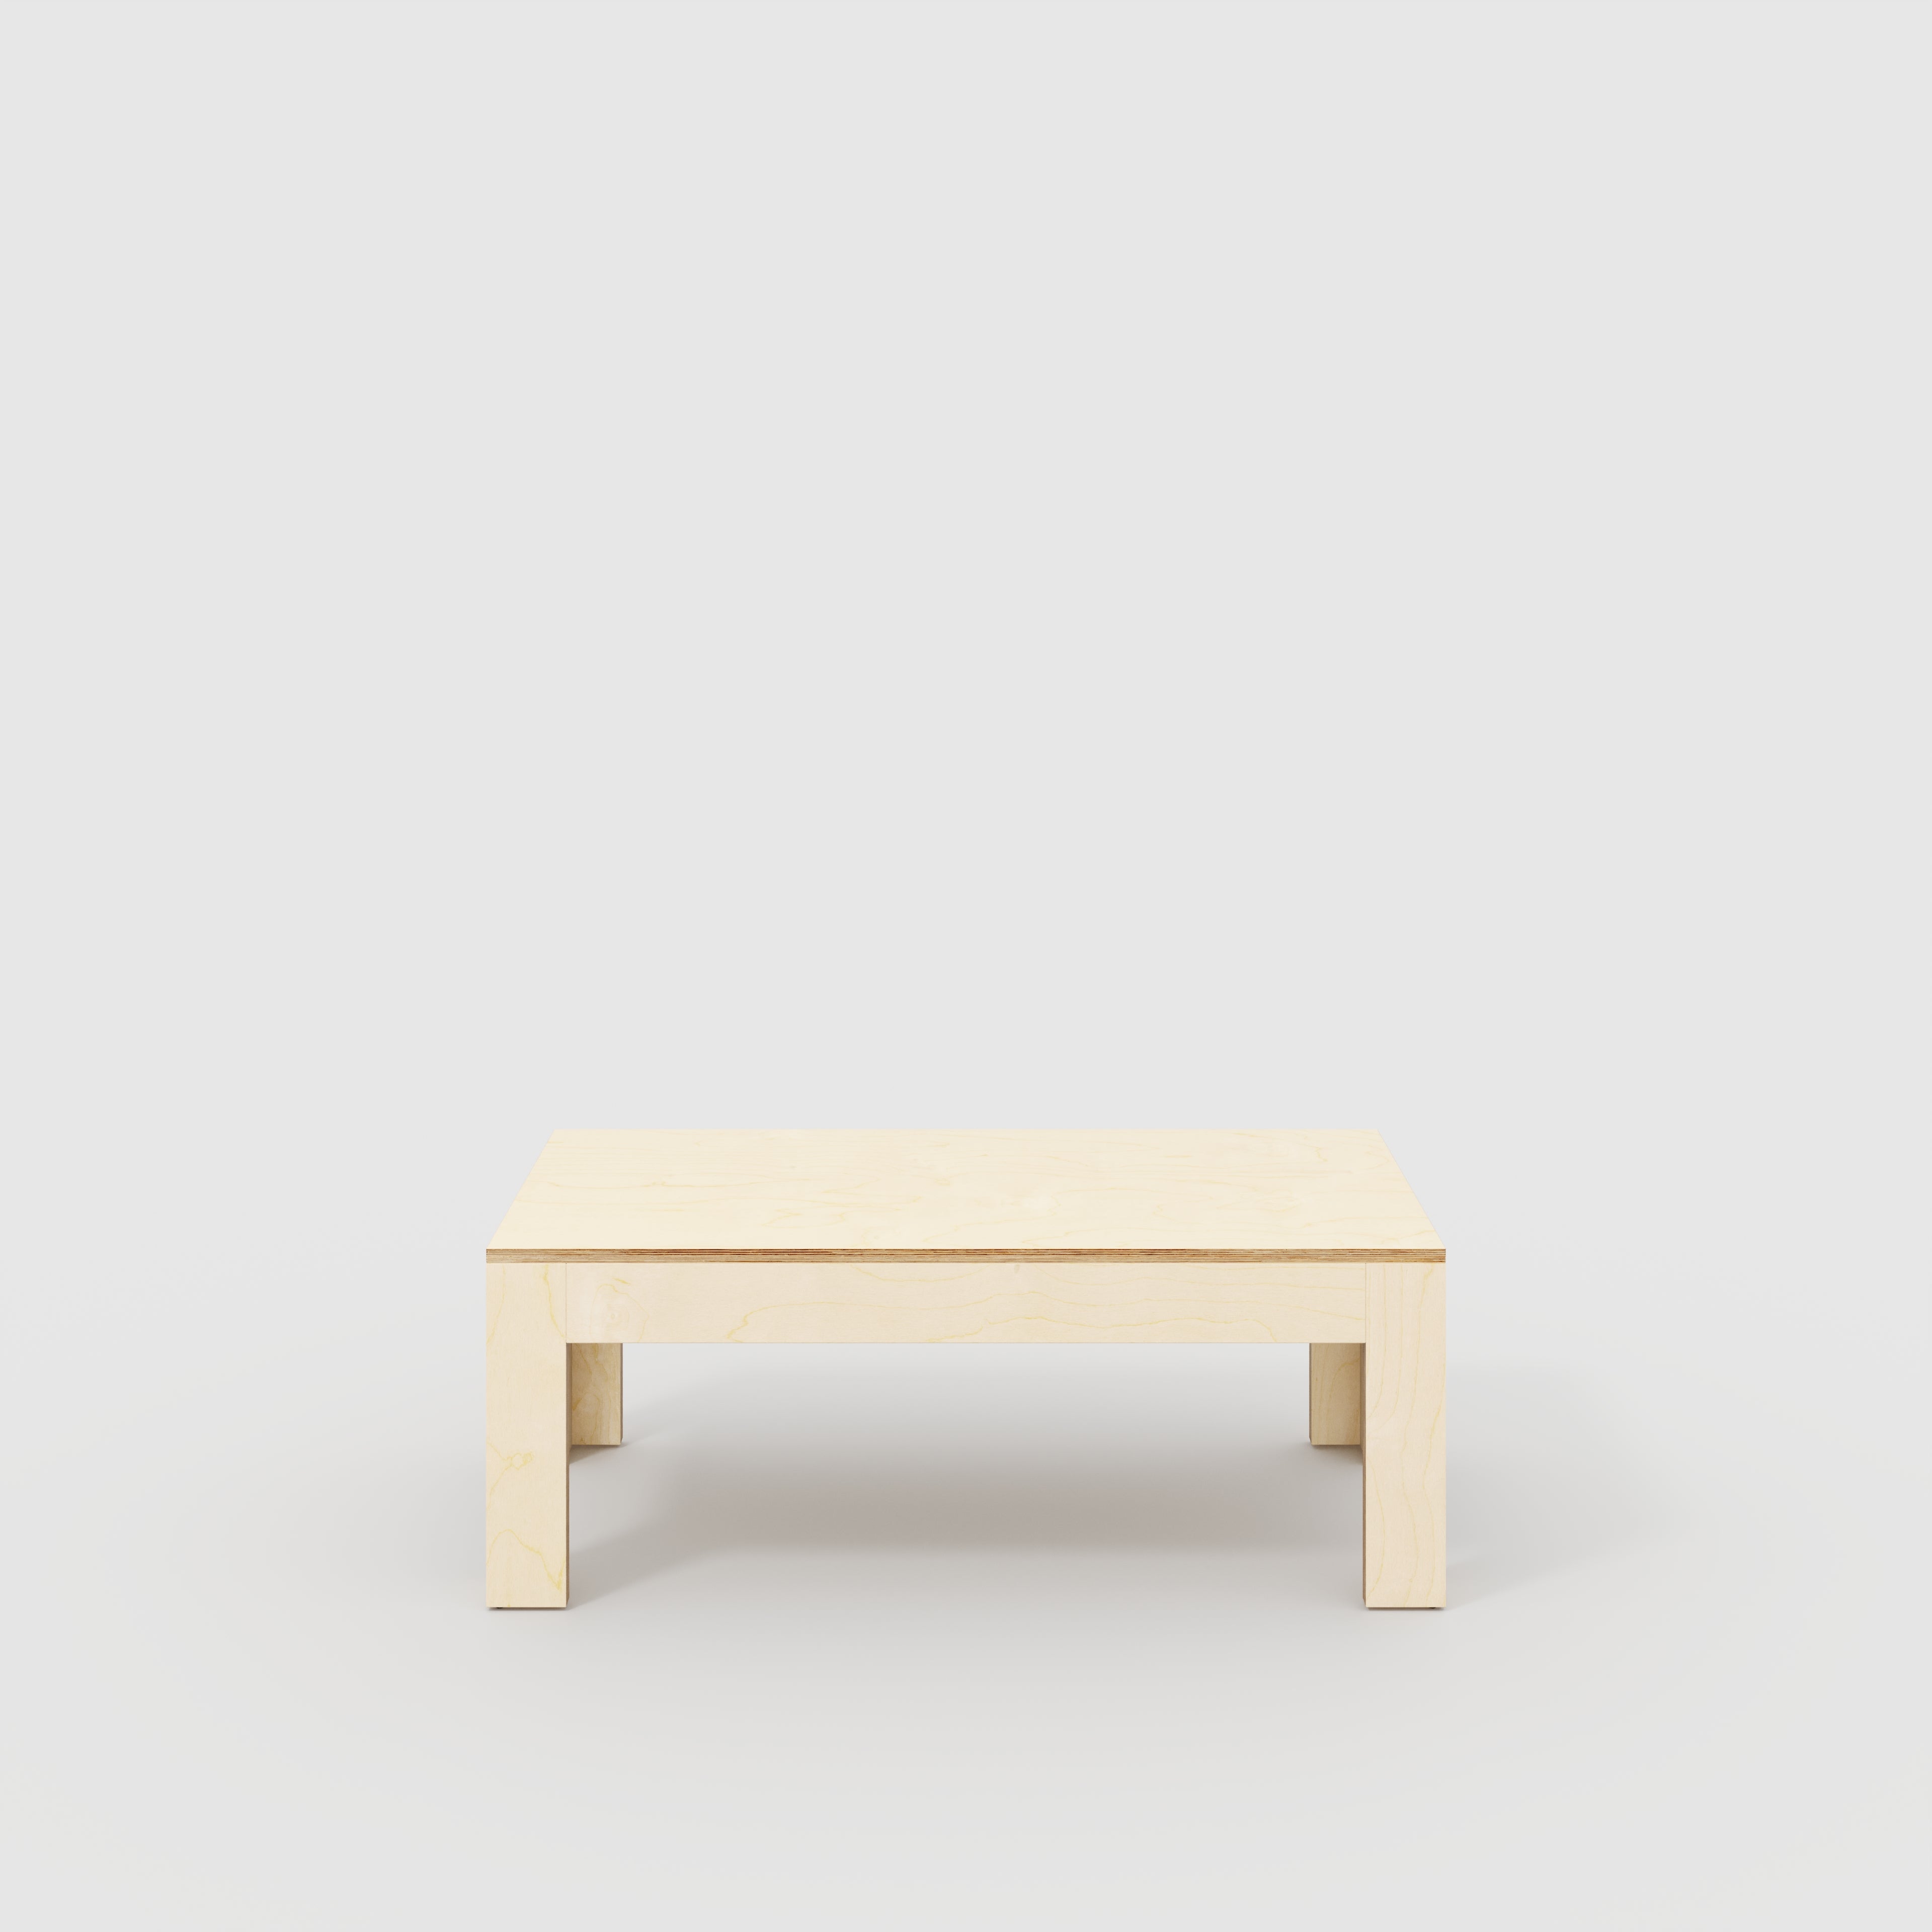 Coffee Table with Solid Frame - Plywood Birch - 1200(w) x 600(d) x 450(h)